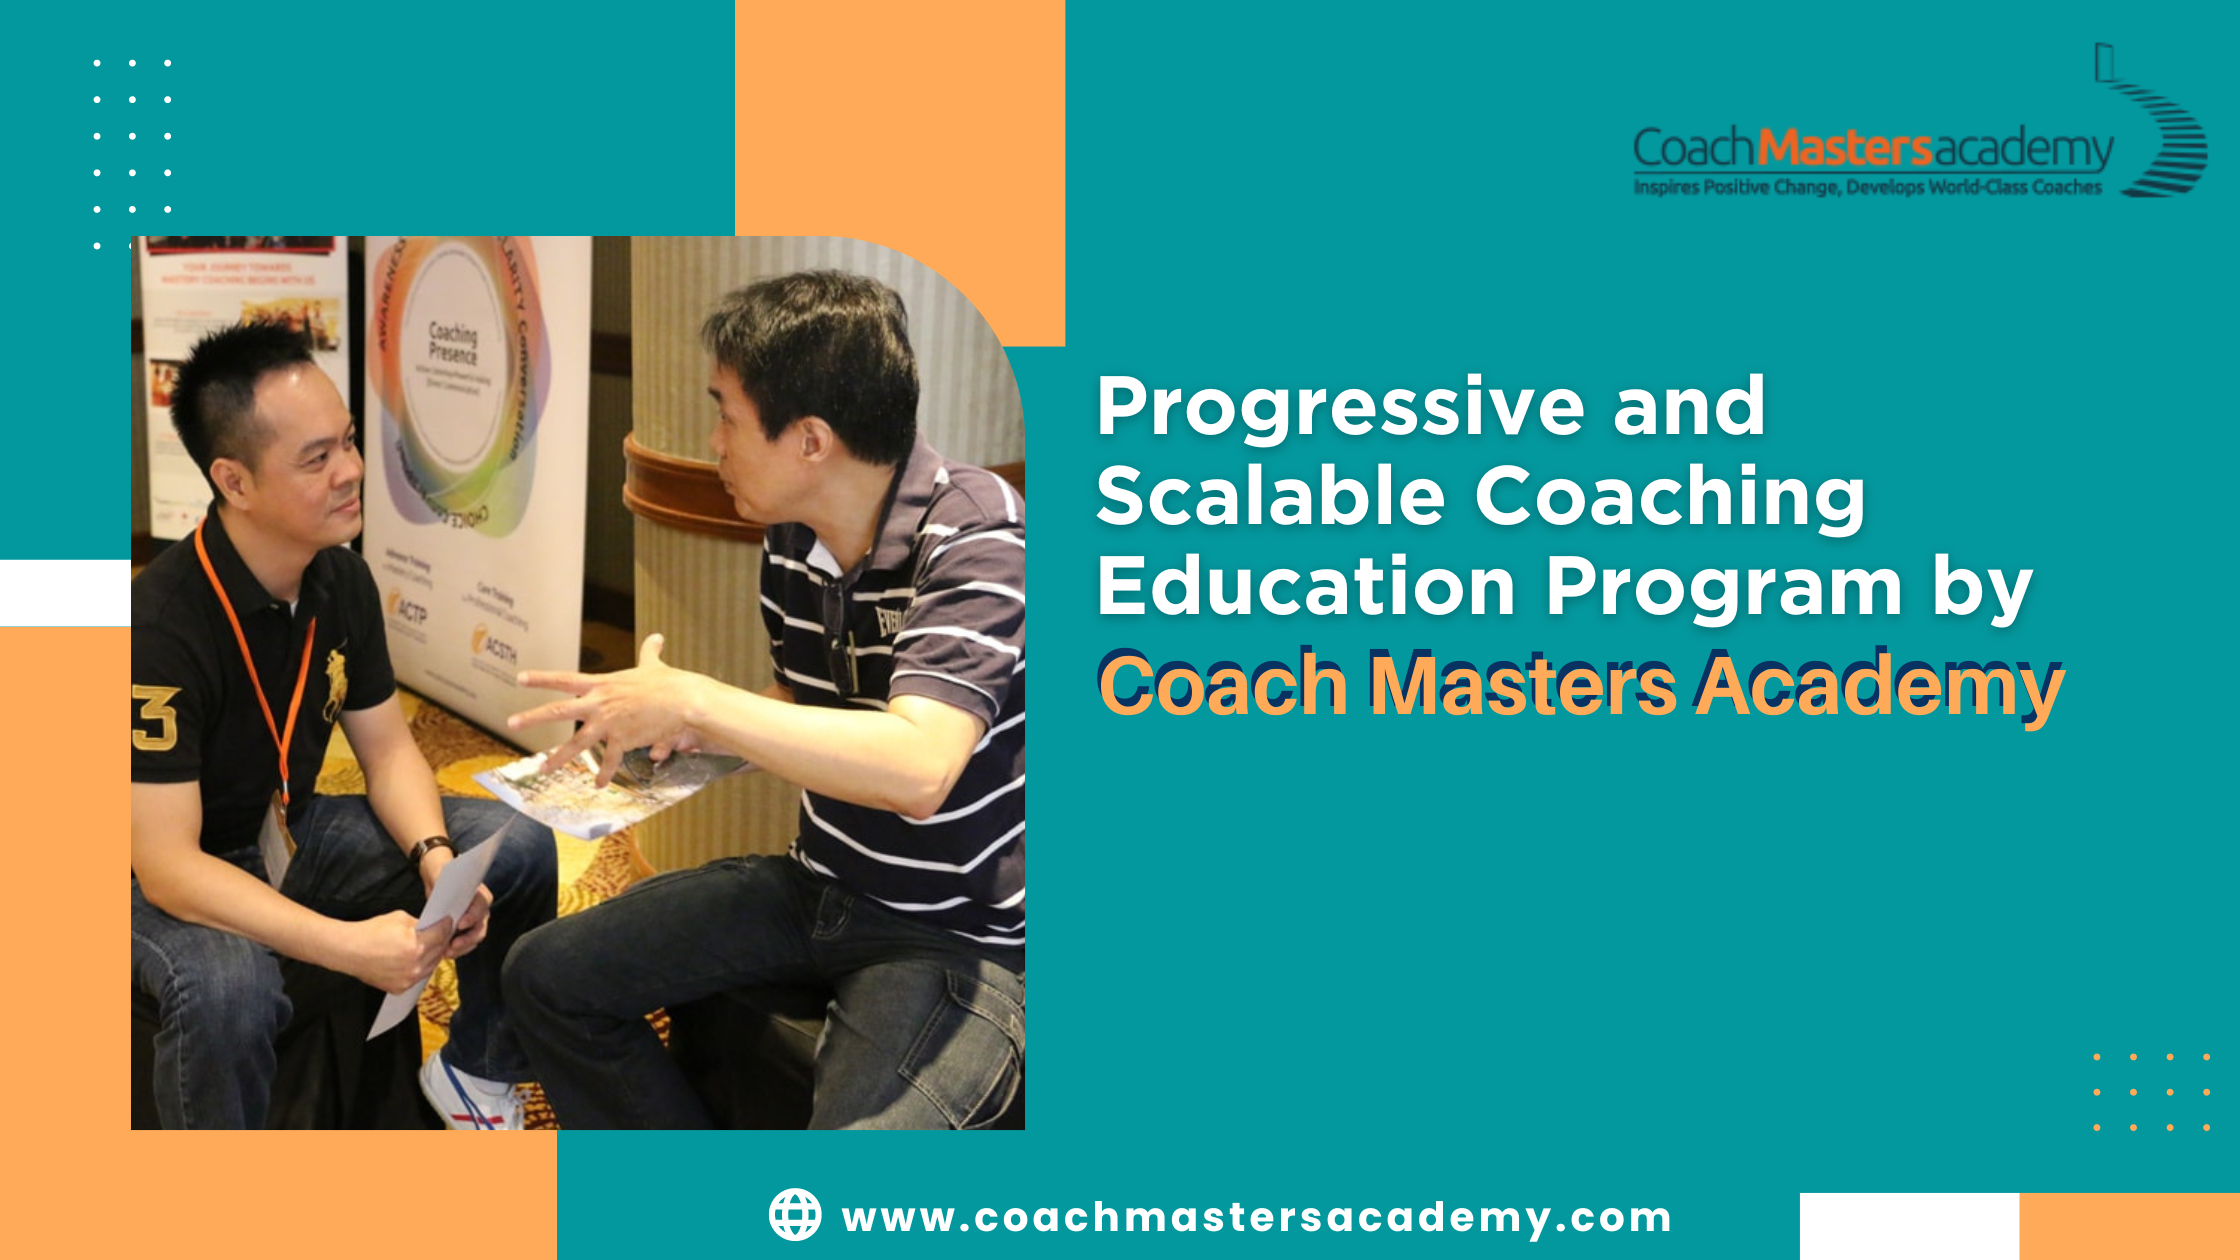 Top coaching education by Coach Masters Academy